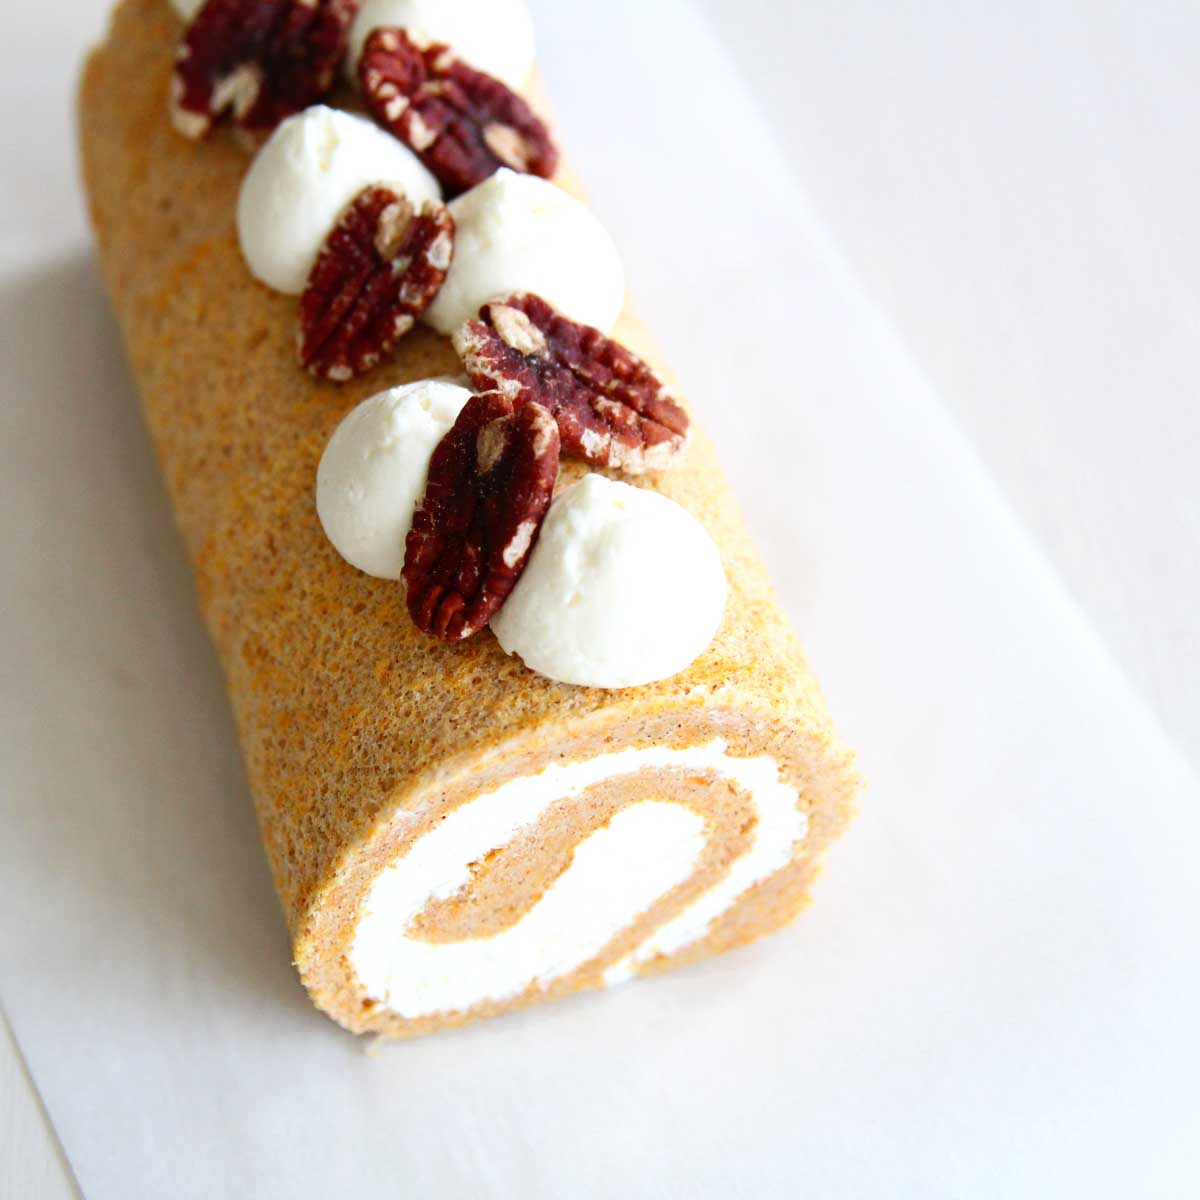 Flourless Sweet Potato Swiss Roll Cake (Lower Carb, Lower Calorie Recipe) - Strawberry Whipped Cream